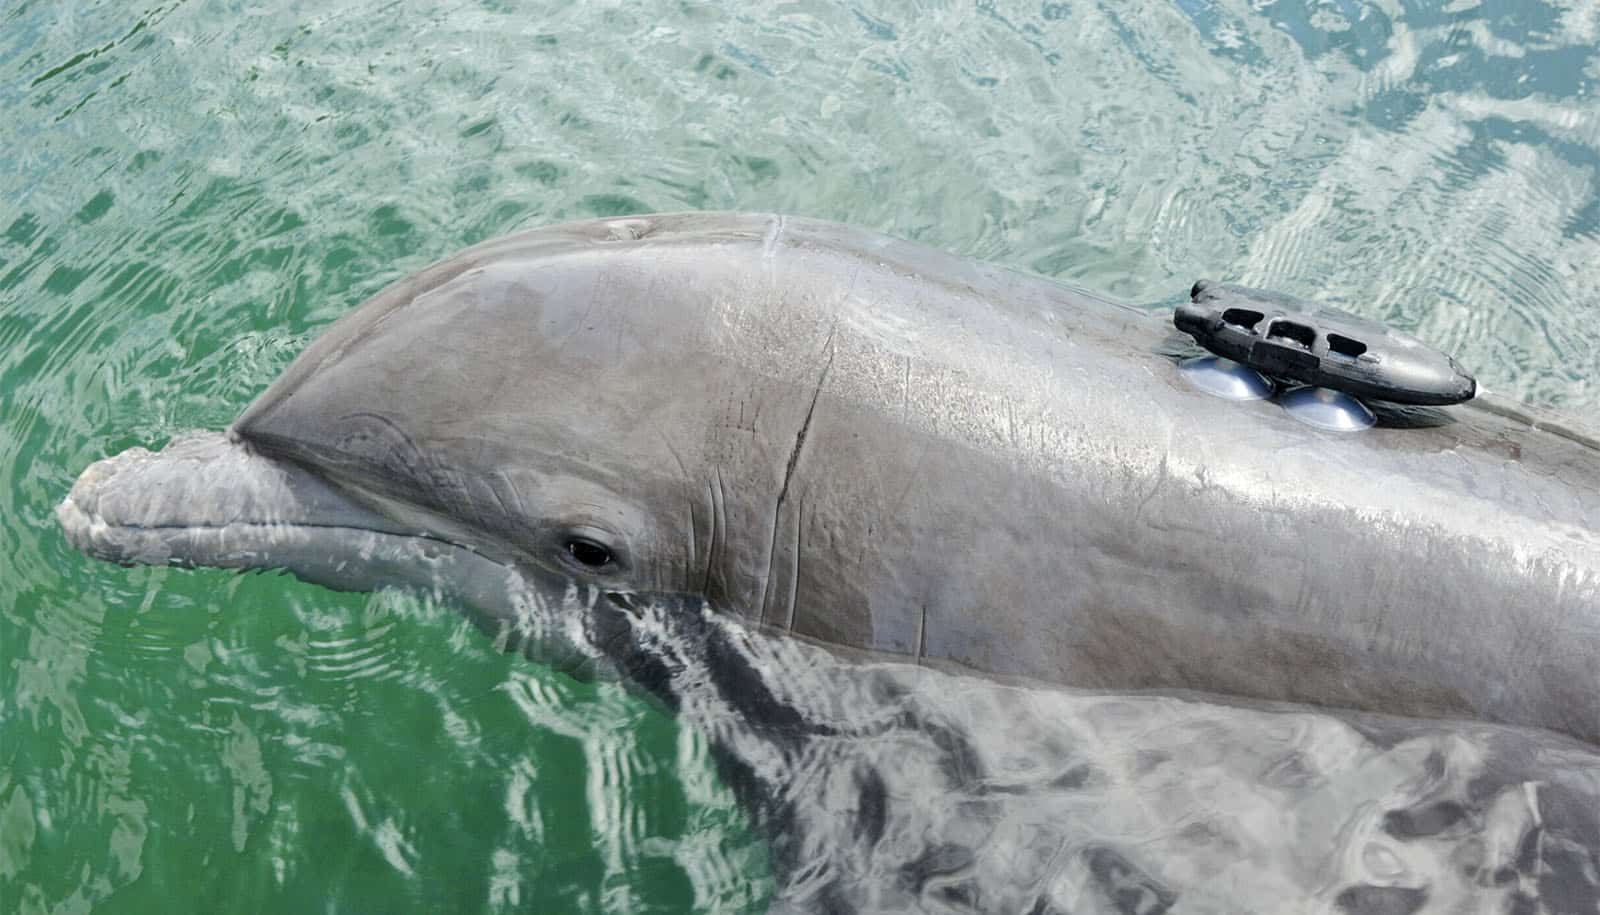 small black objected attached to dolphin's back with suction cups